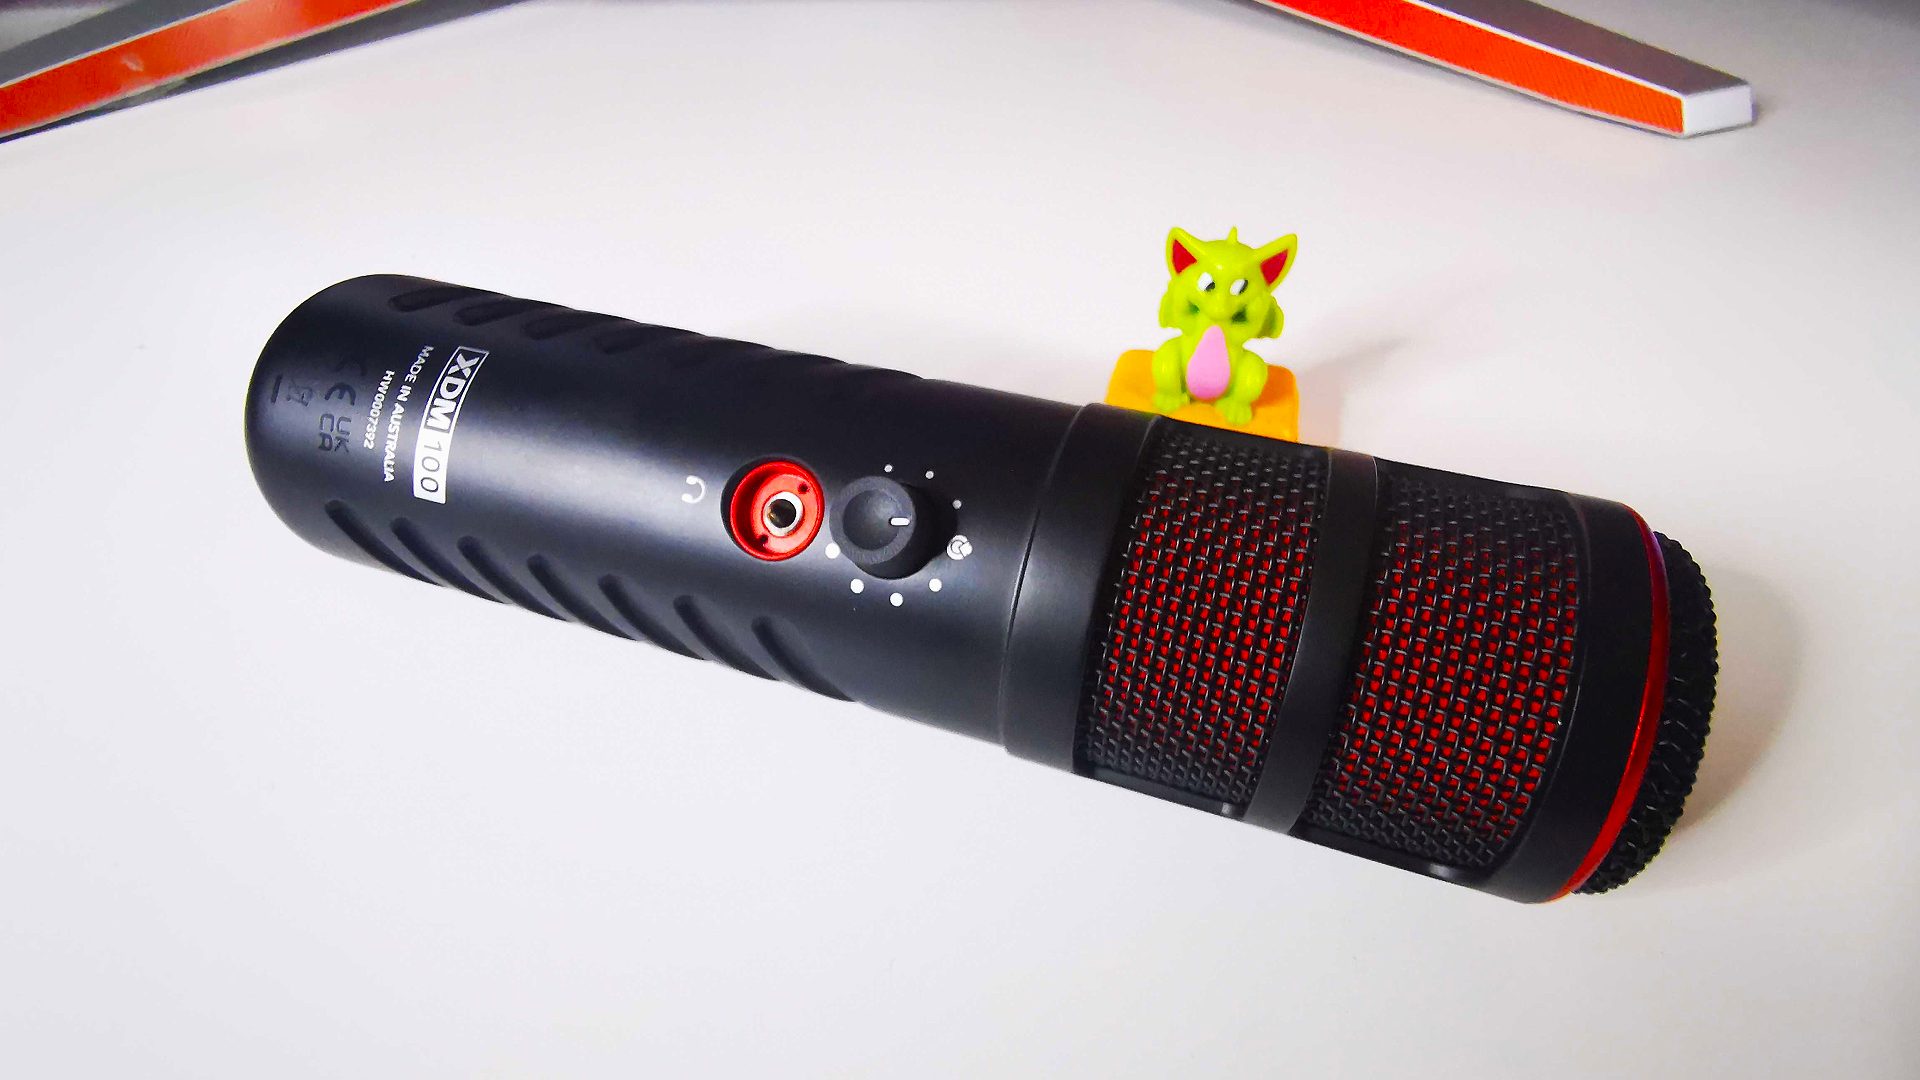 Rode X XDM-100 review: The best USB microphone I've used